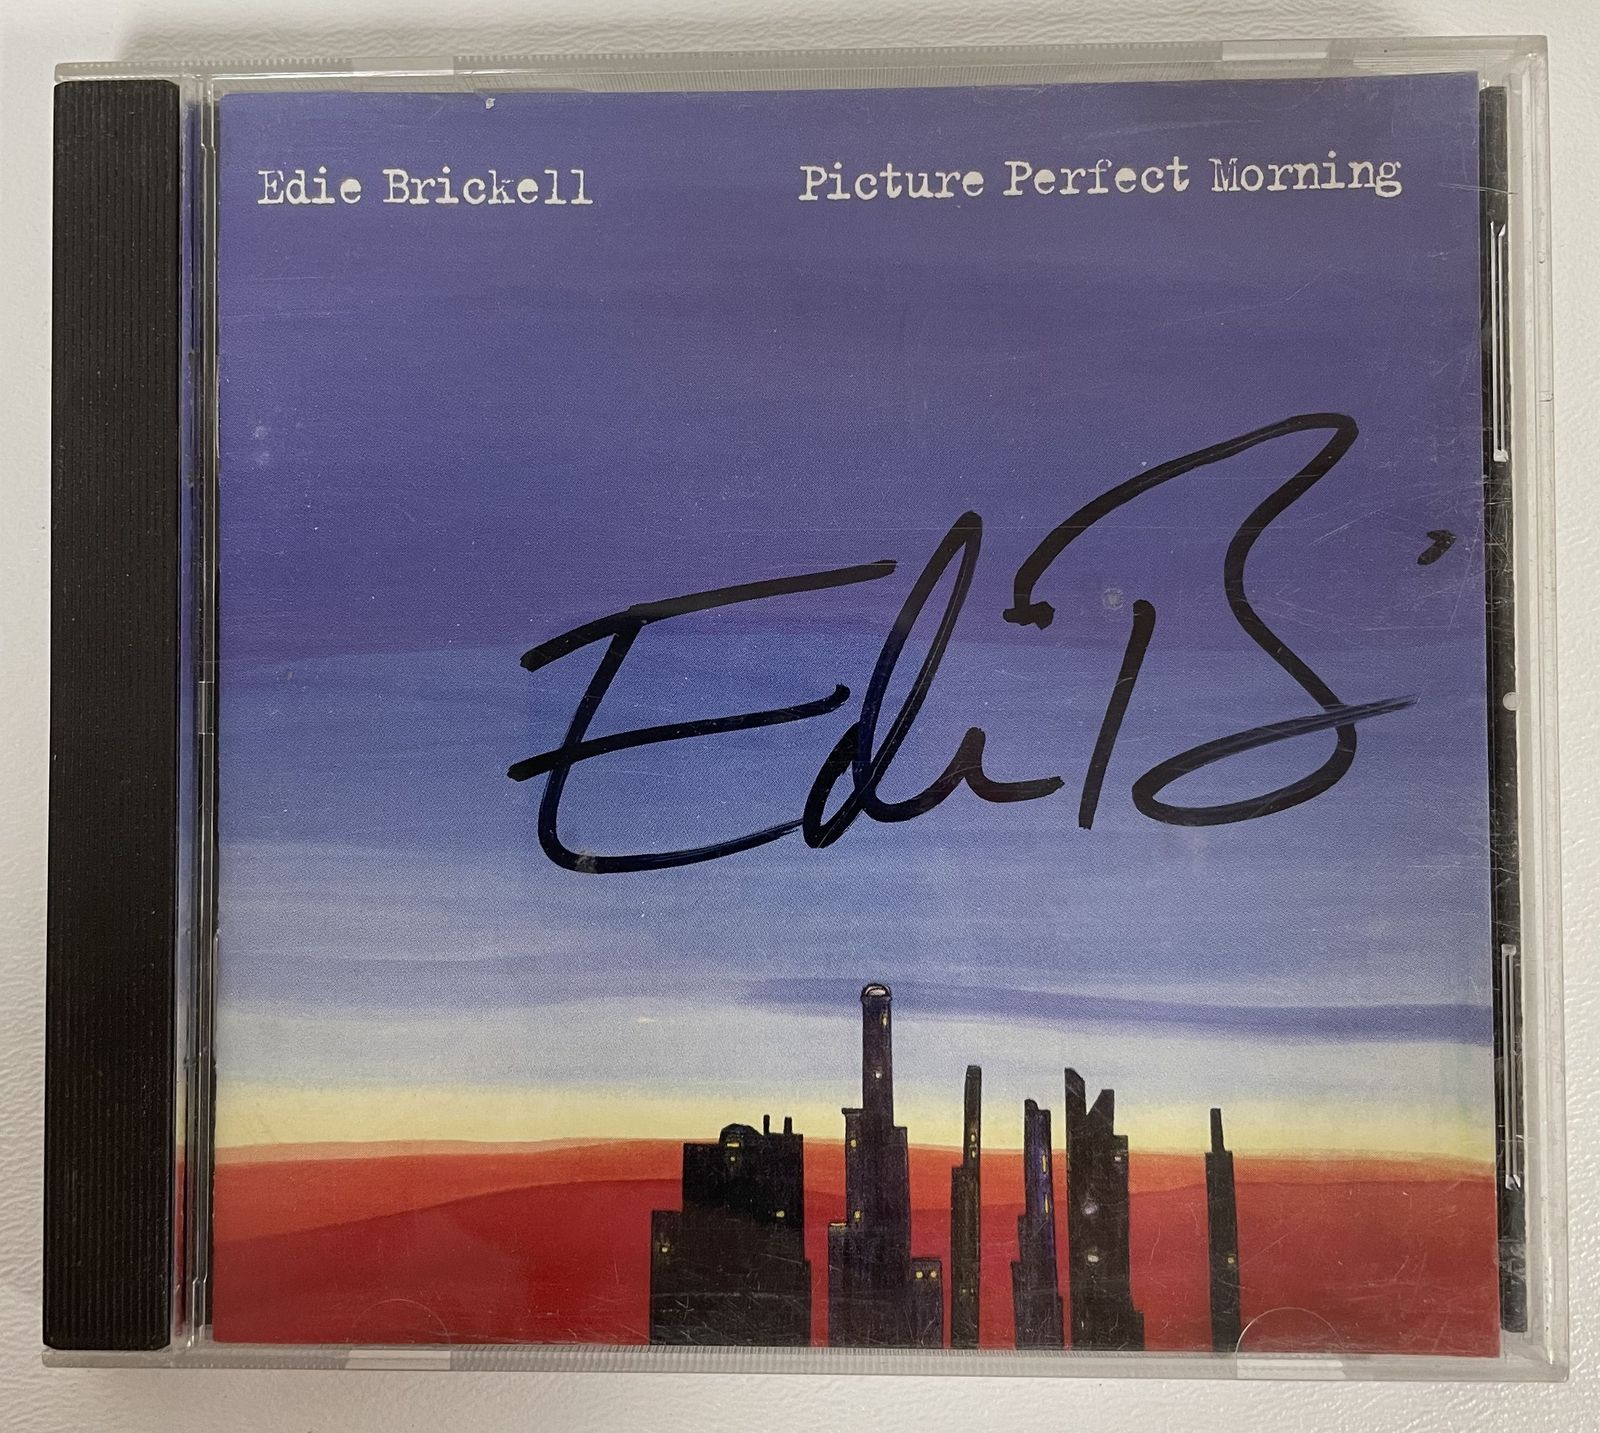 Edie Brickell Signed Autographed "Picture Perfect Morning" Music CD - COA Holos - $59.99